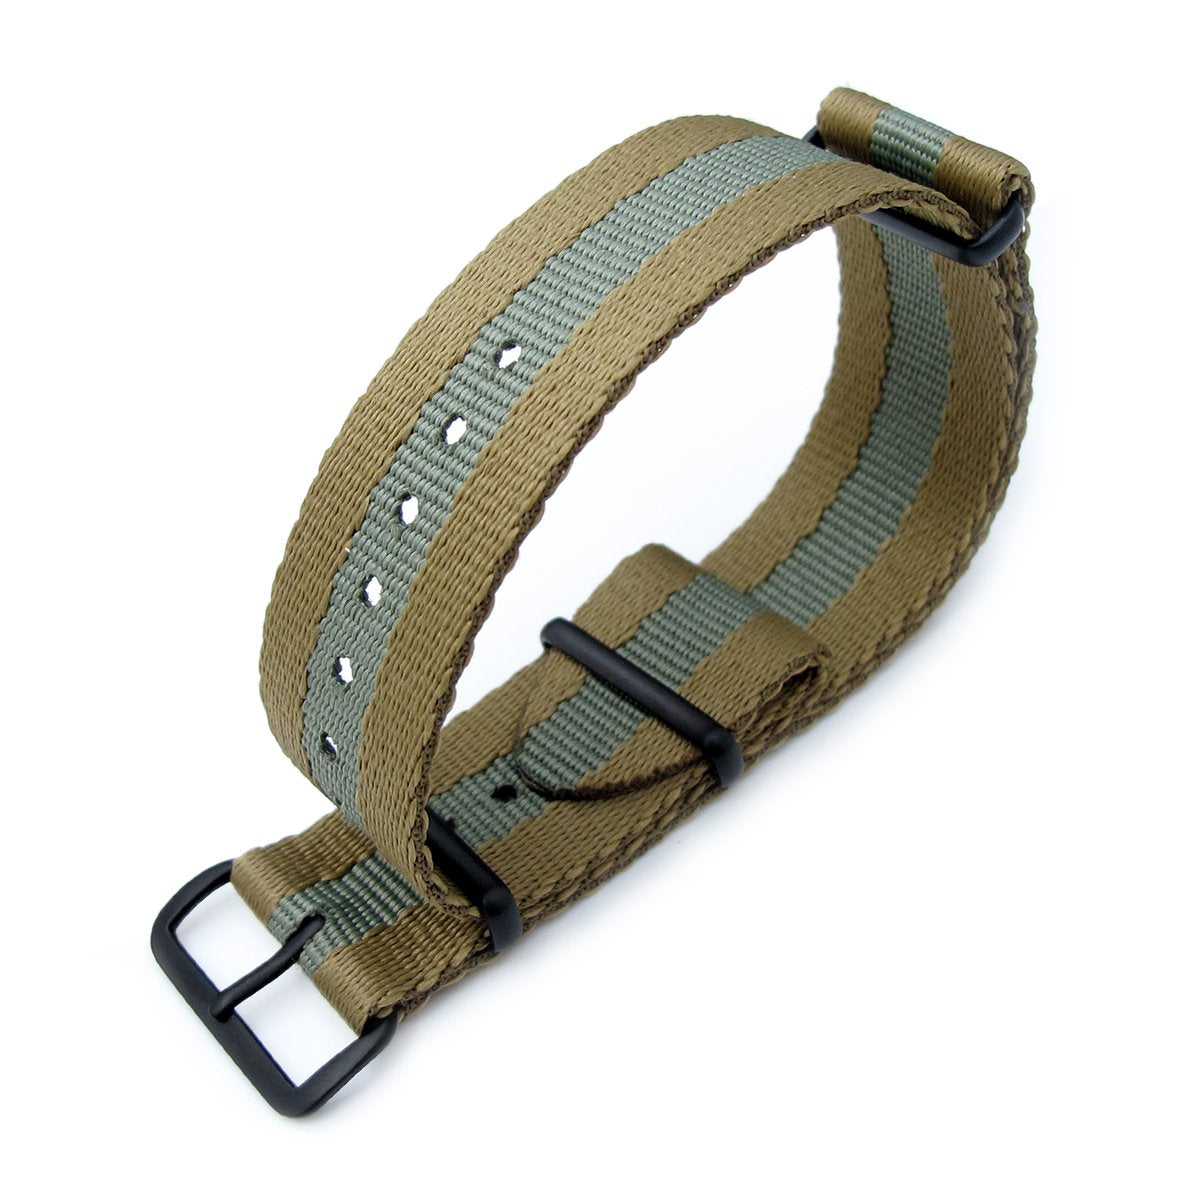 MiLTAT 20mm or 22mm G10 Military NATO Watch Strap Sandwich Nylon Armband PVD Black Military Green Strapcode Watch Bands